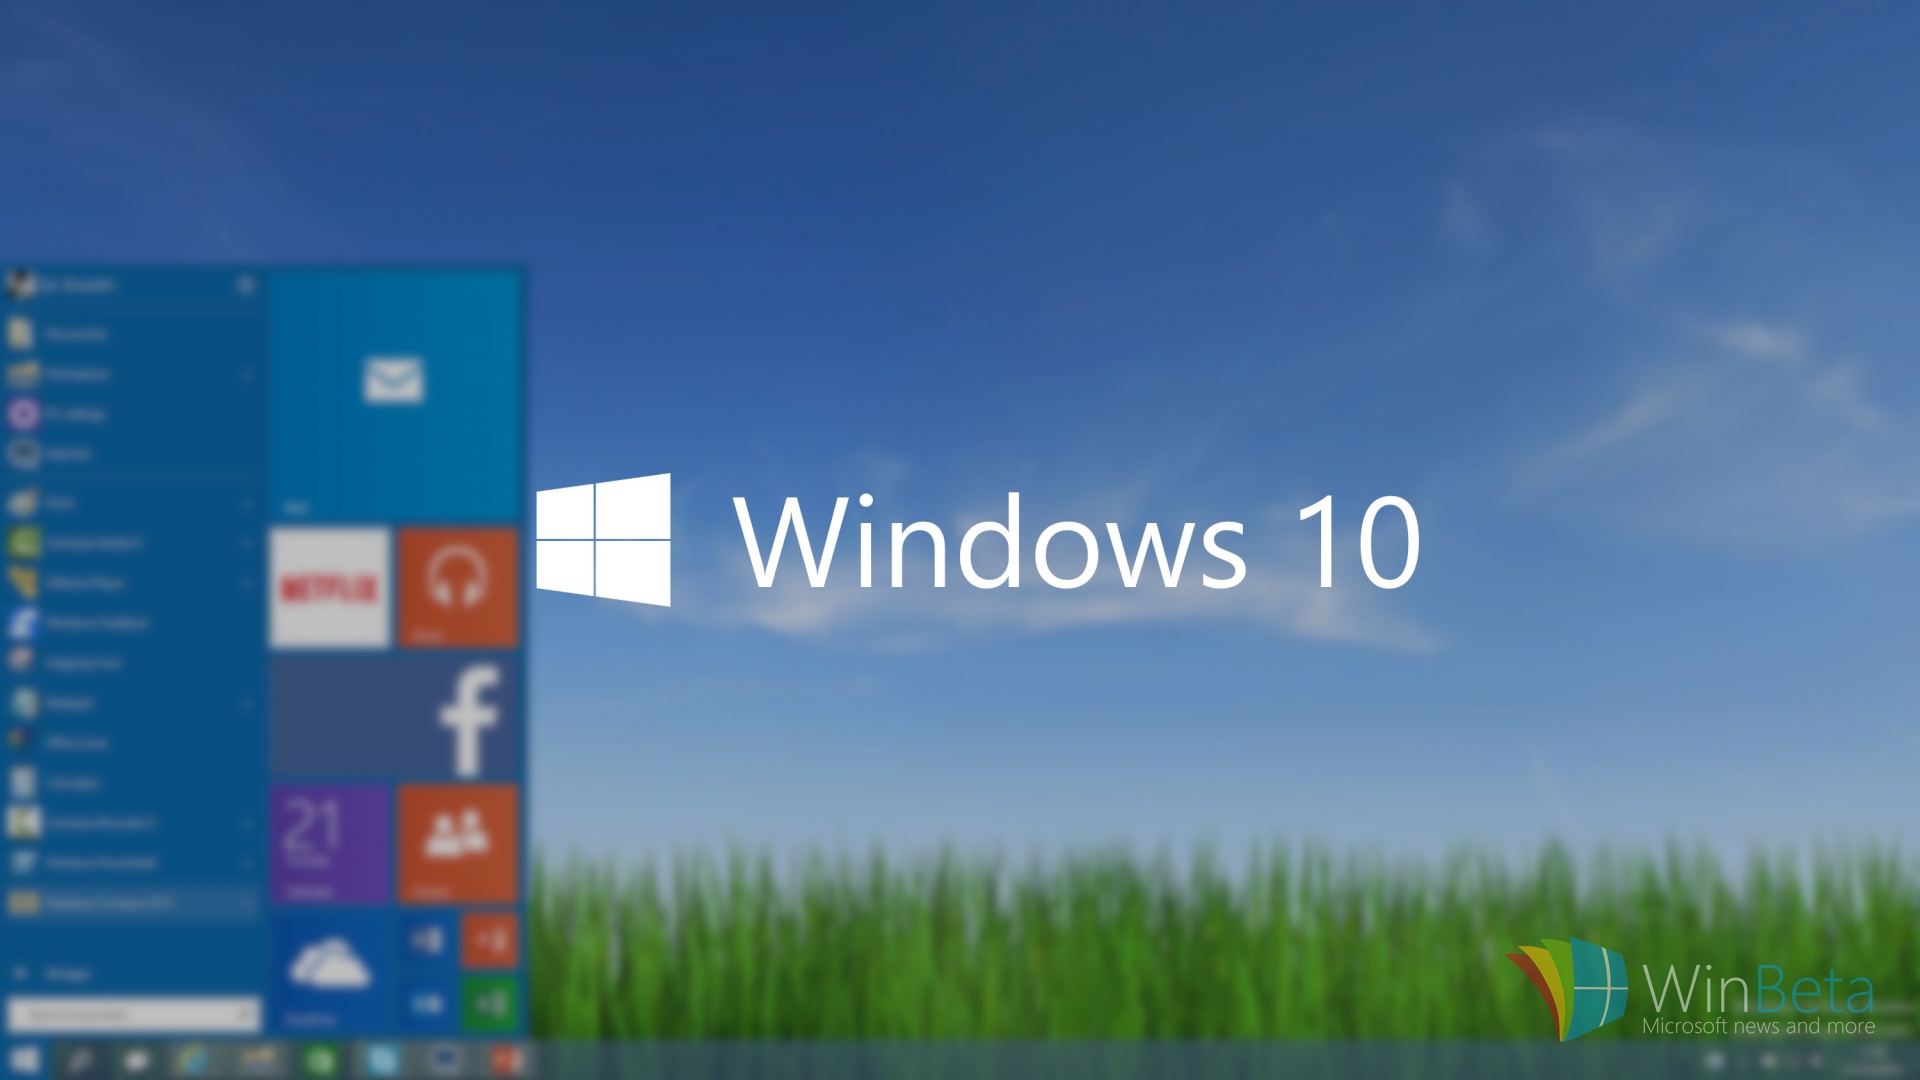 Windows 10: Big Brother is Watching You